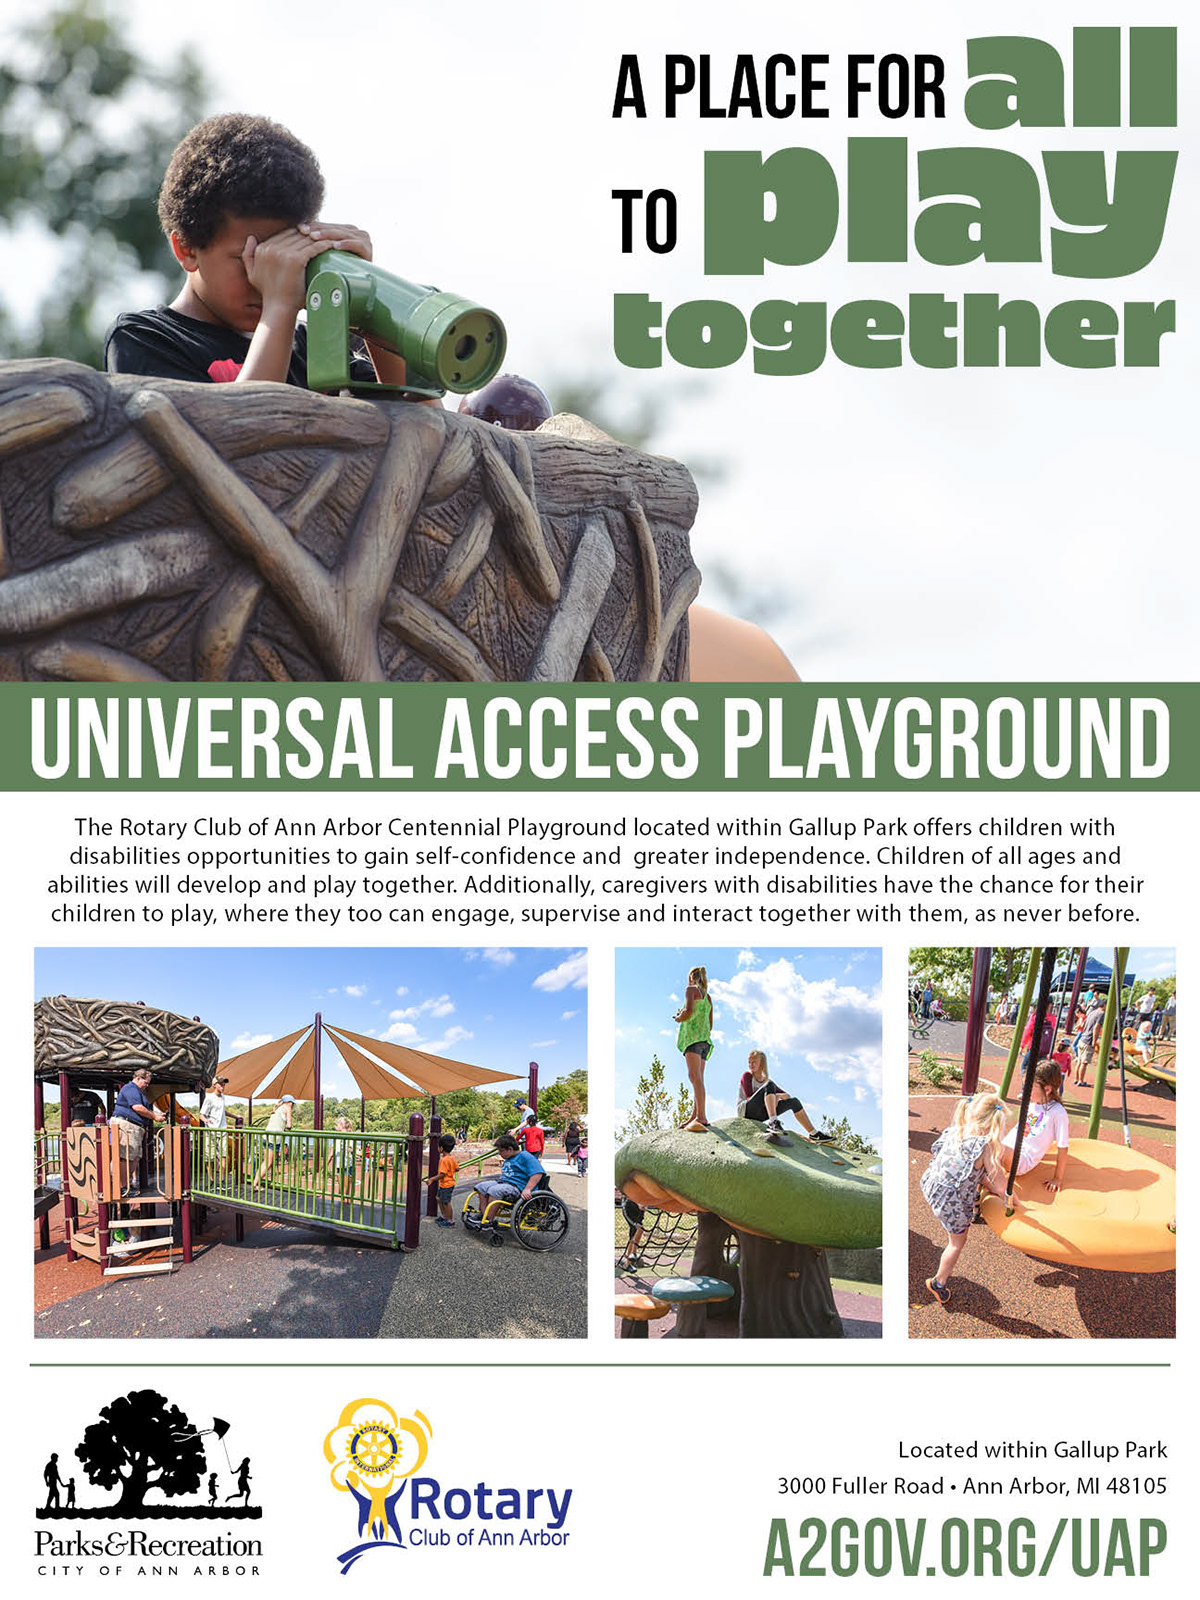 Playground Play Equipment parks recreation poster ann arbor outdoors play children Parks and Recreation